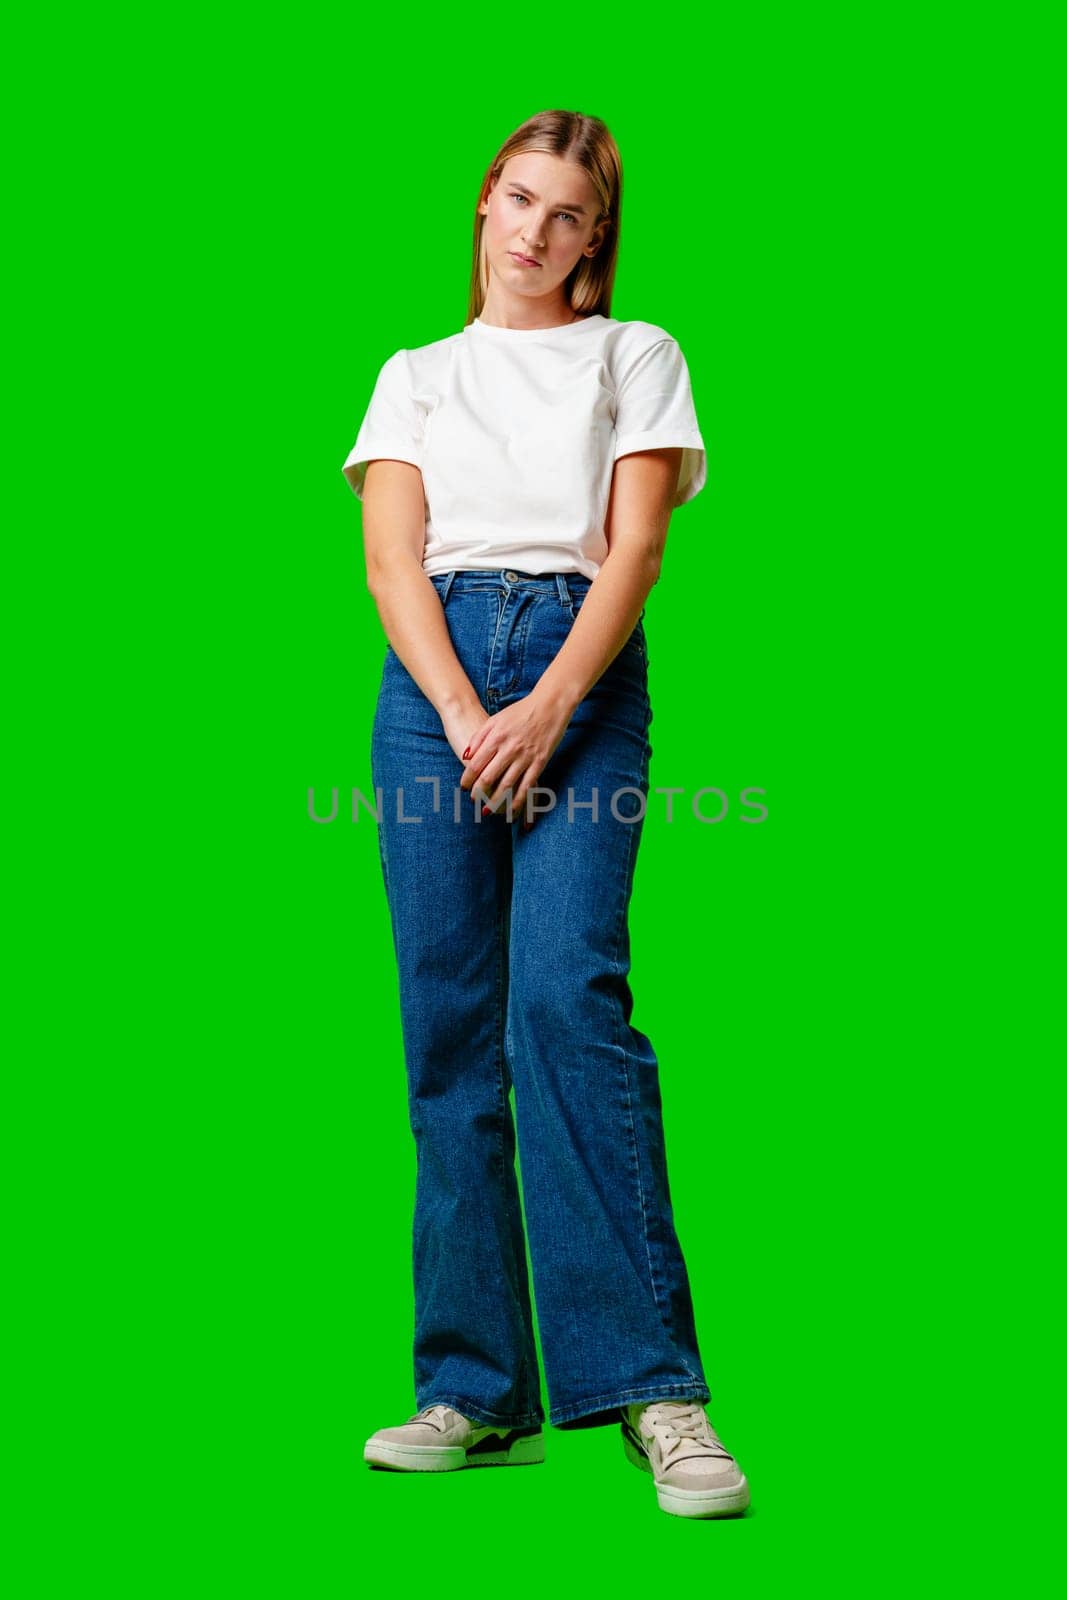 Young Woman With Pursed Lips Expressing Skepticism Against Green Screen Background by Fabrikasimf